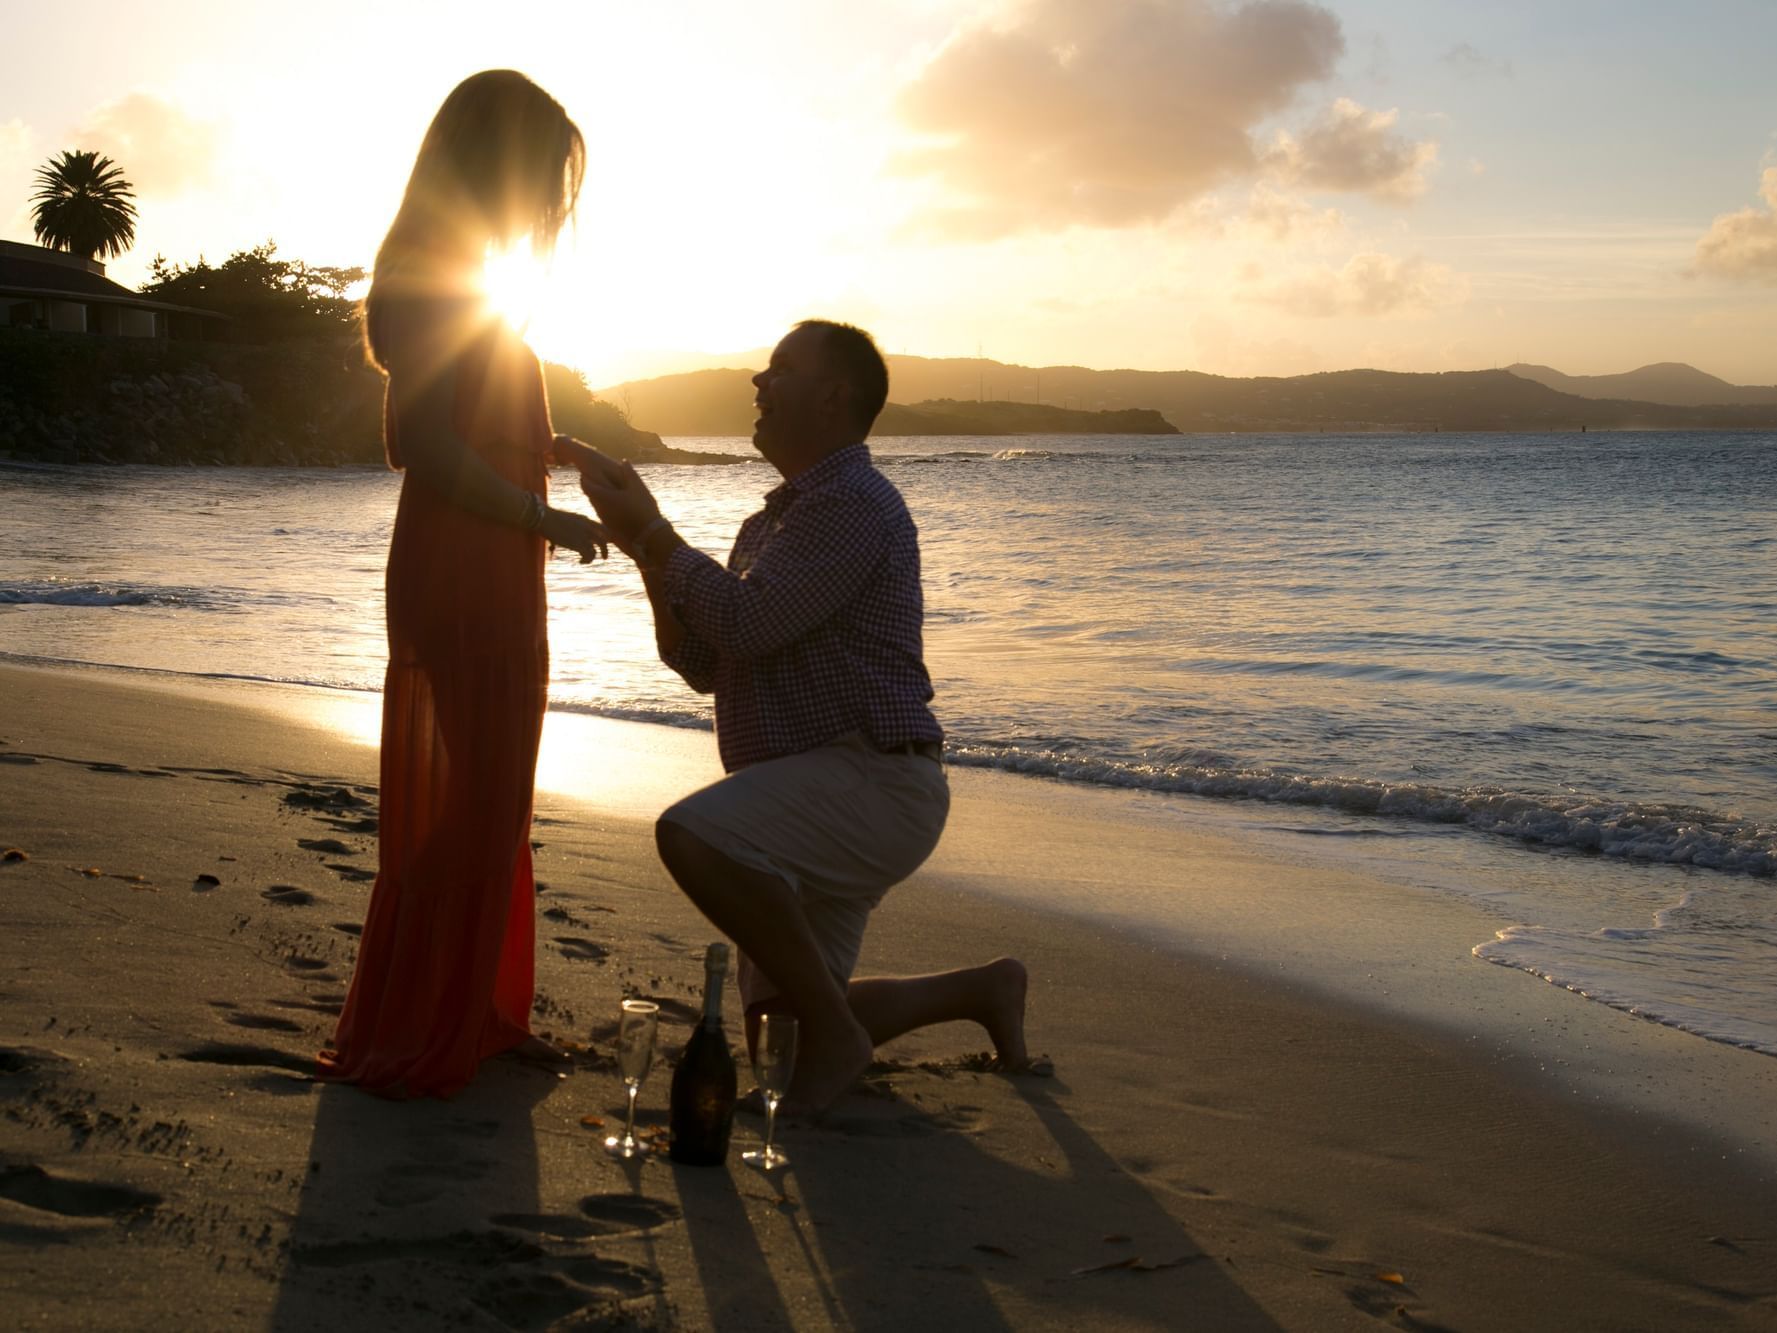 A marriage proposal on the beach near The Buccaneer at sunset